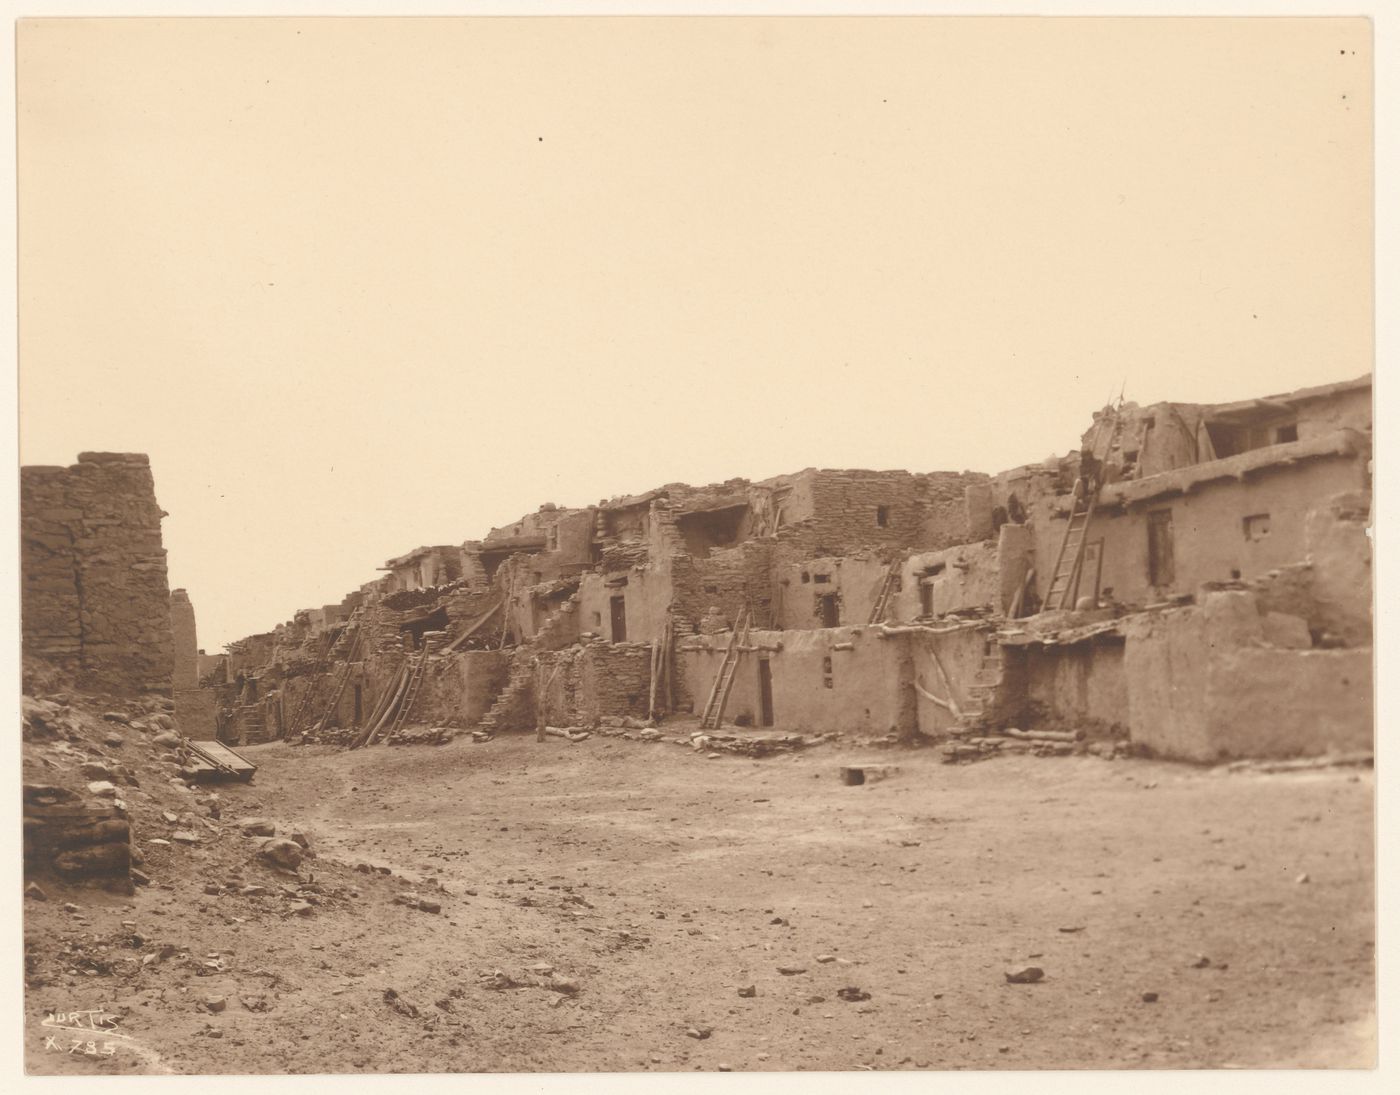 View of multi-storied houses with a person sitting on a ladder on the right, Shungopavi, Second Mesa, Hopi Reservation, Arizona, United States